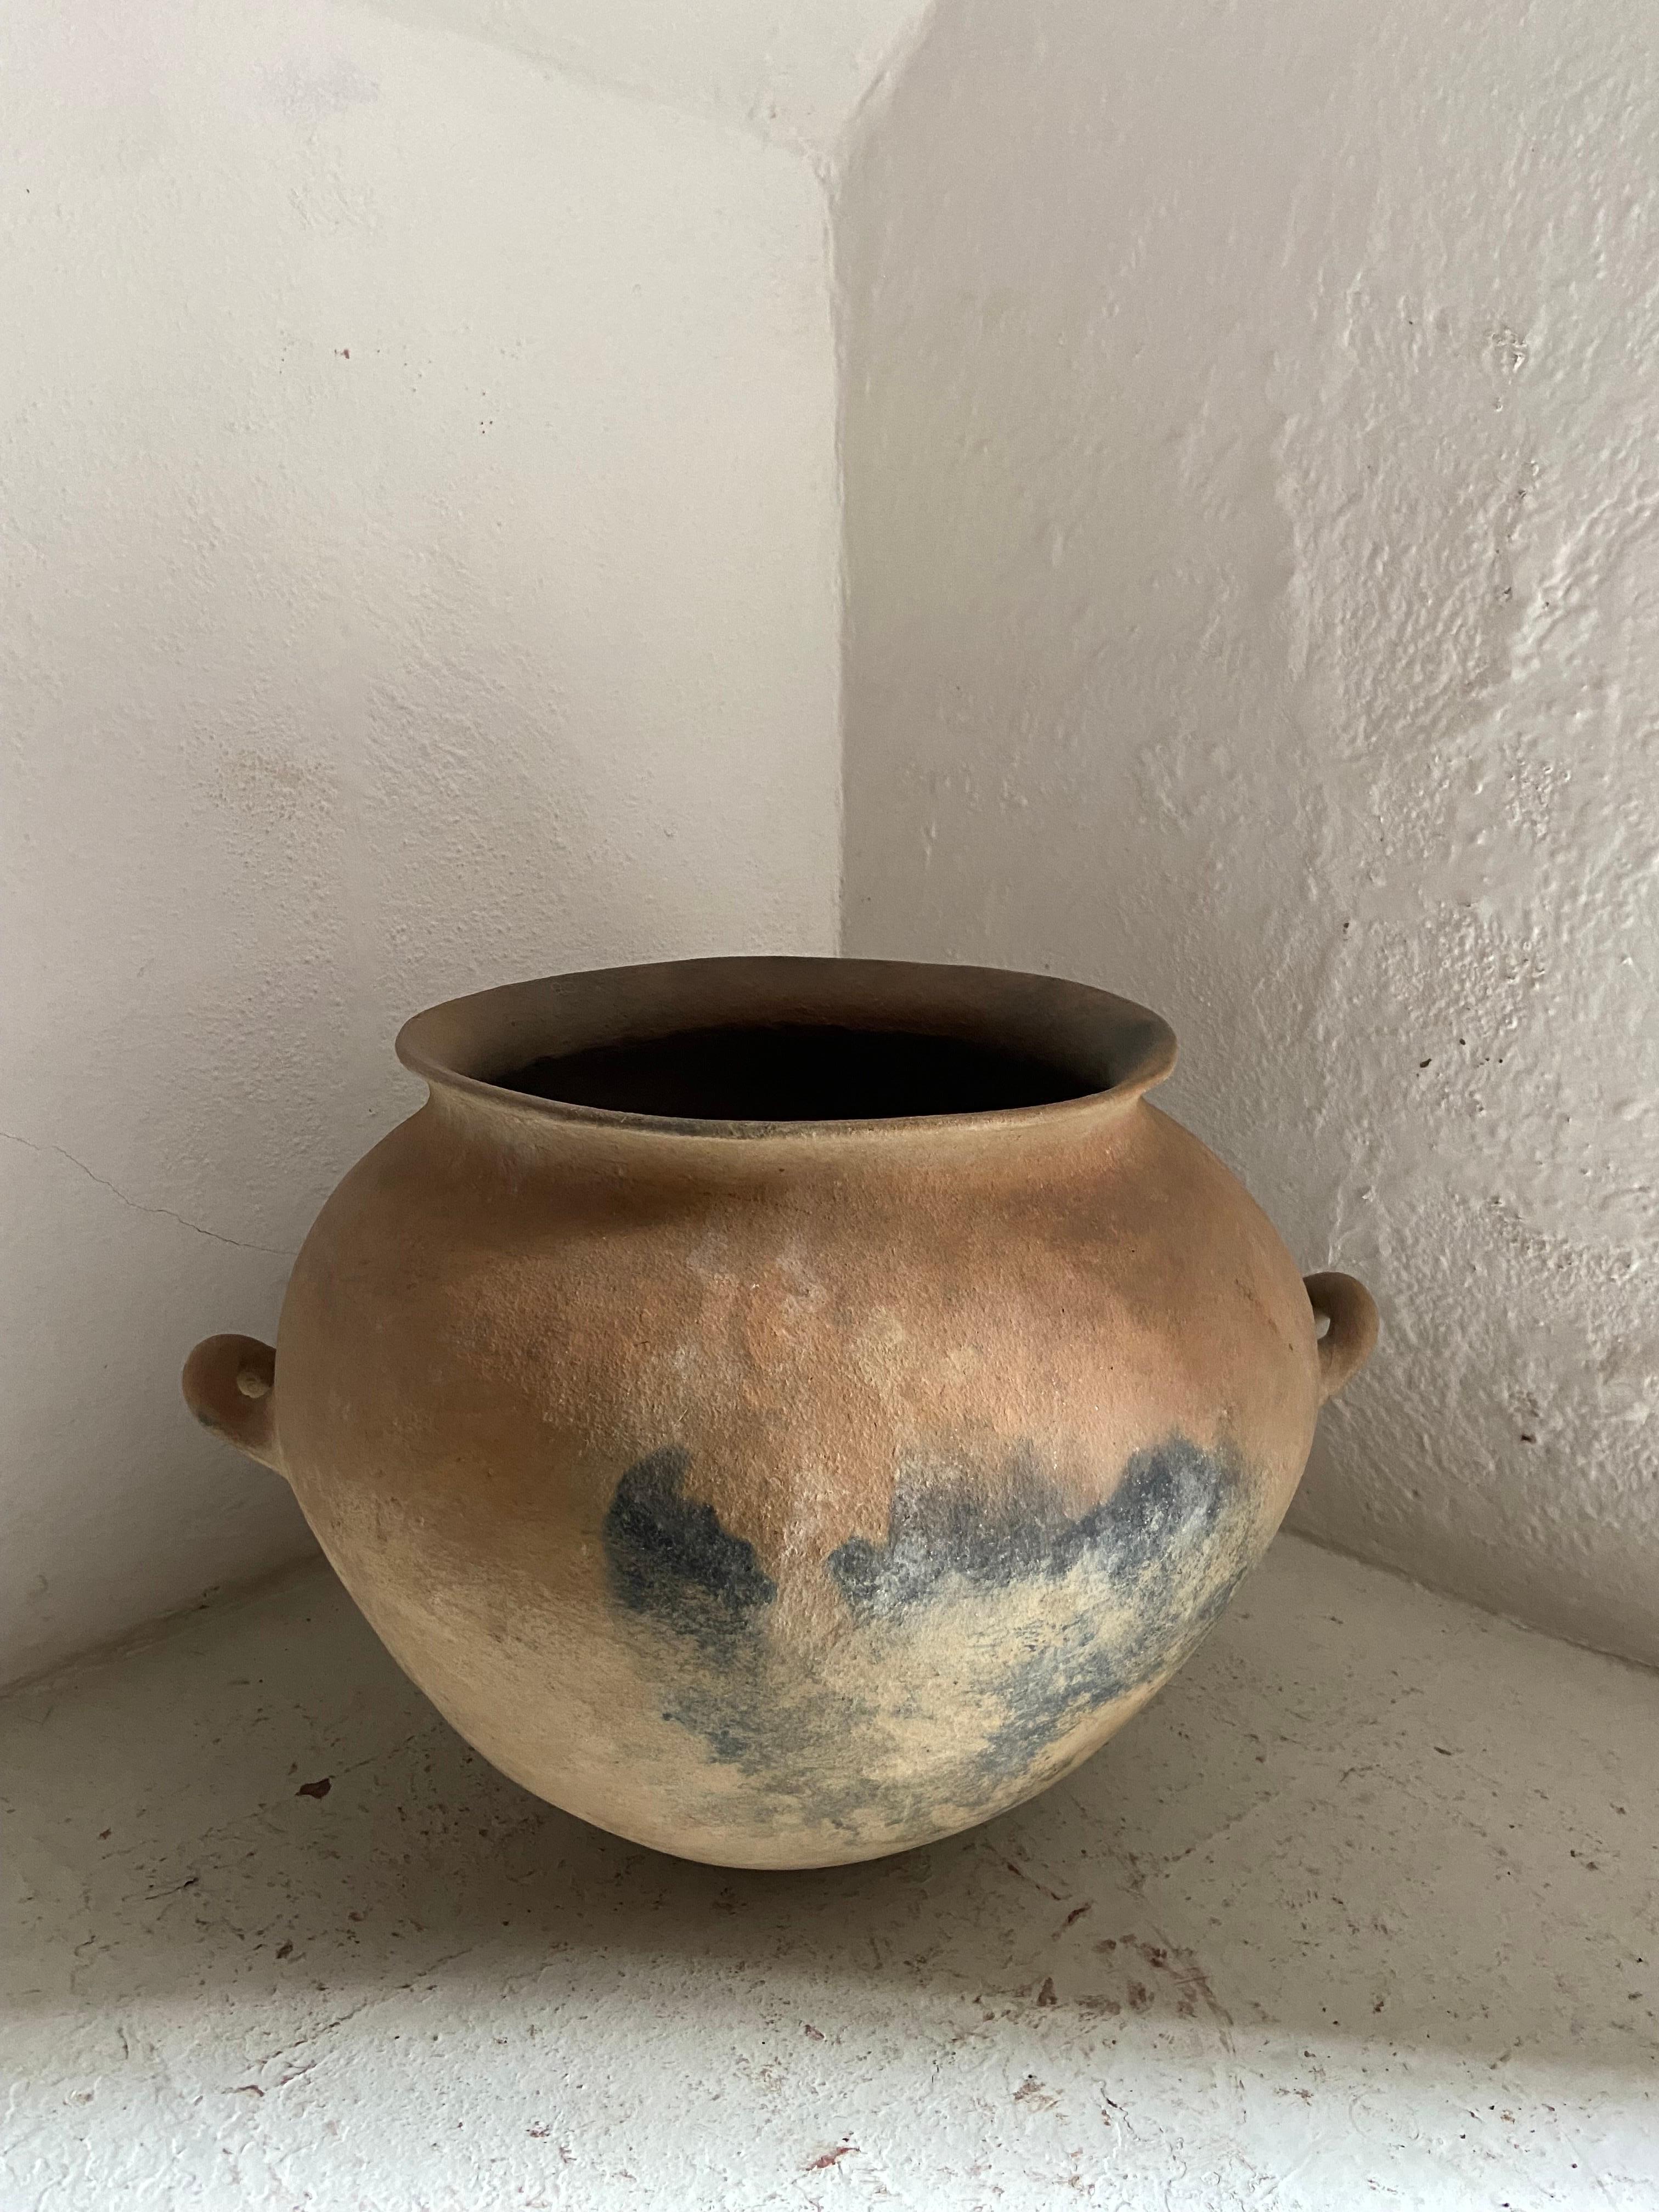 Terracotta water pot from the high sierras of Puebla, Mexico, circa 1970´s. The vessel was hand crafted in the 1960´s - 1970´s and has a beautiful form. Handles are original and completely intact.